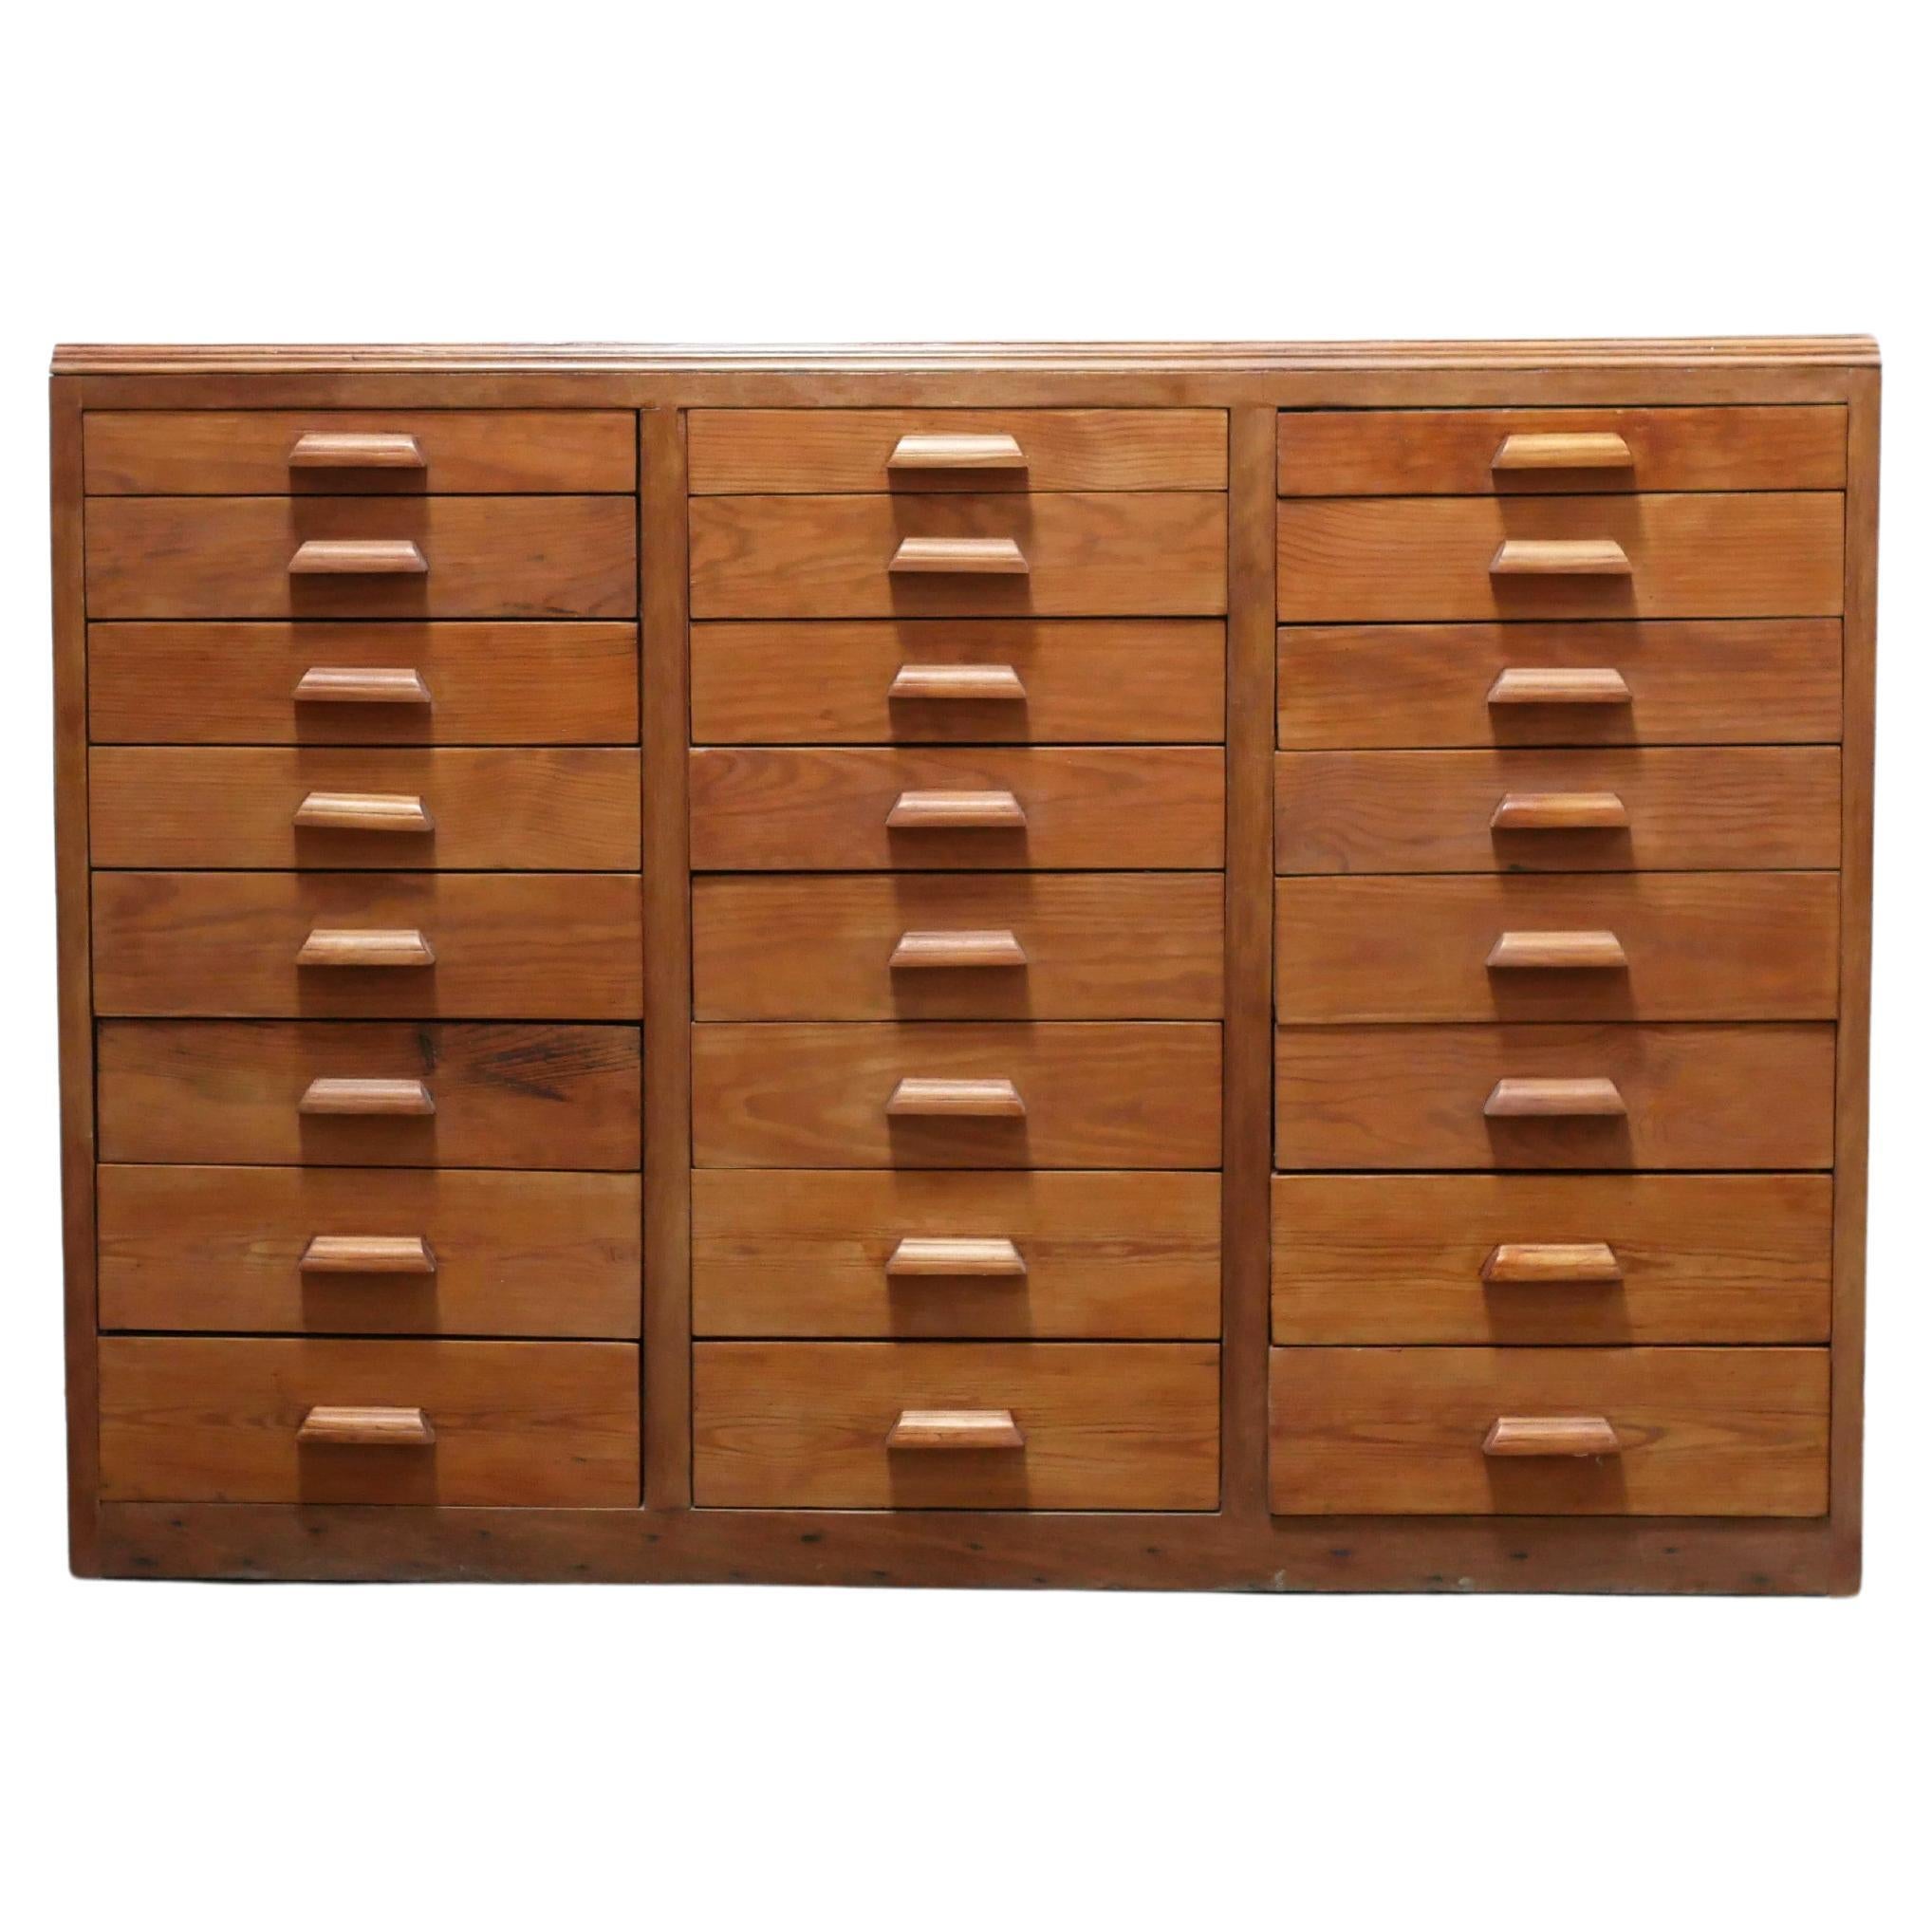 Vintage trade furniture with drawers